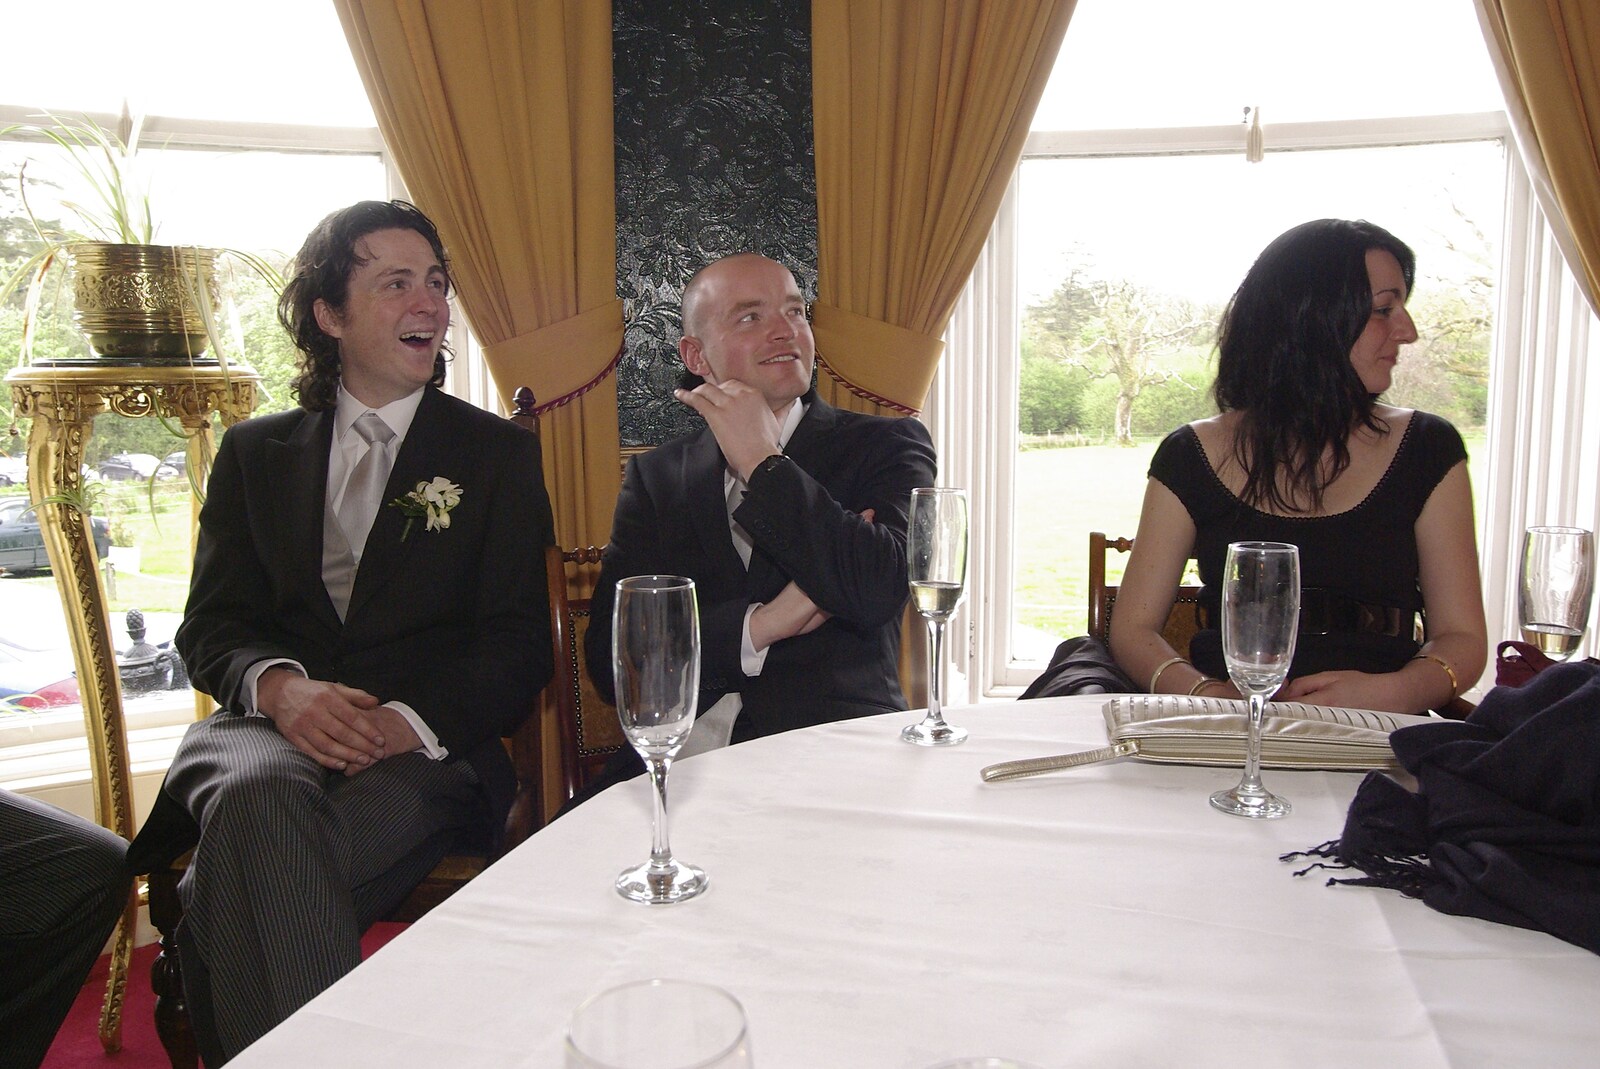 Barry and Gary from Paul and Jenny's Wedding, Tralee, County Kerry, Ireland - 3rd May 2008